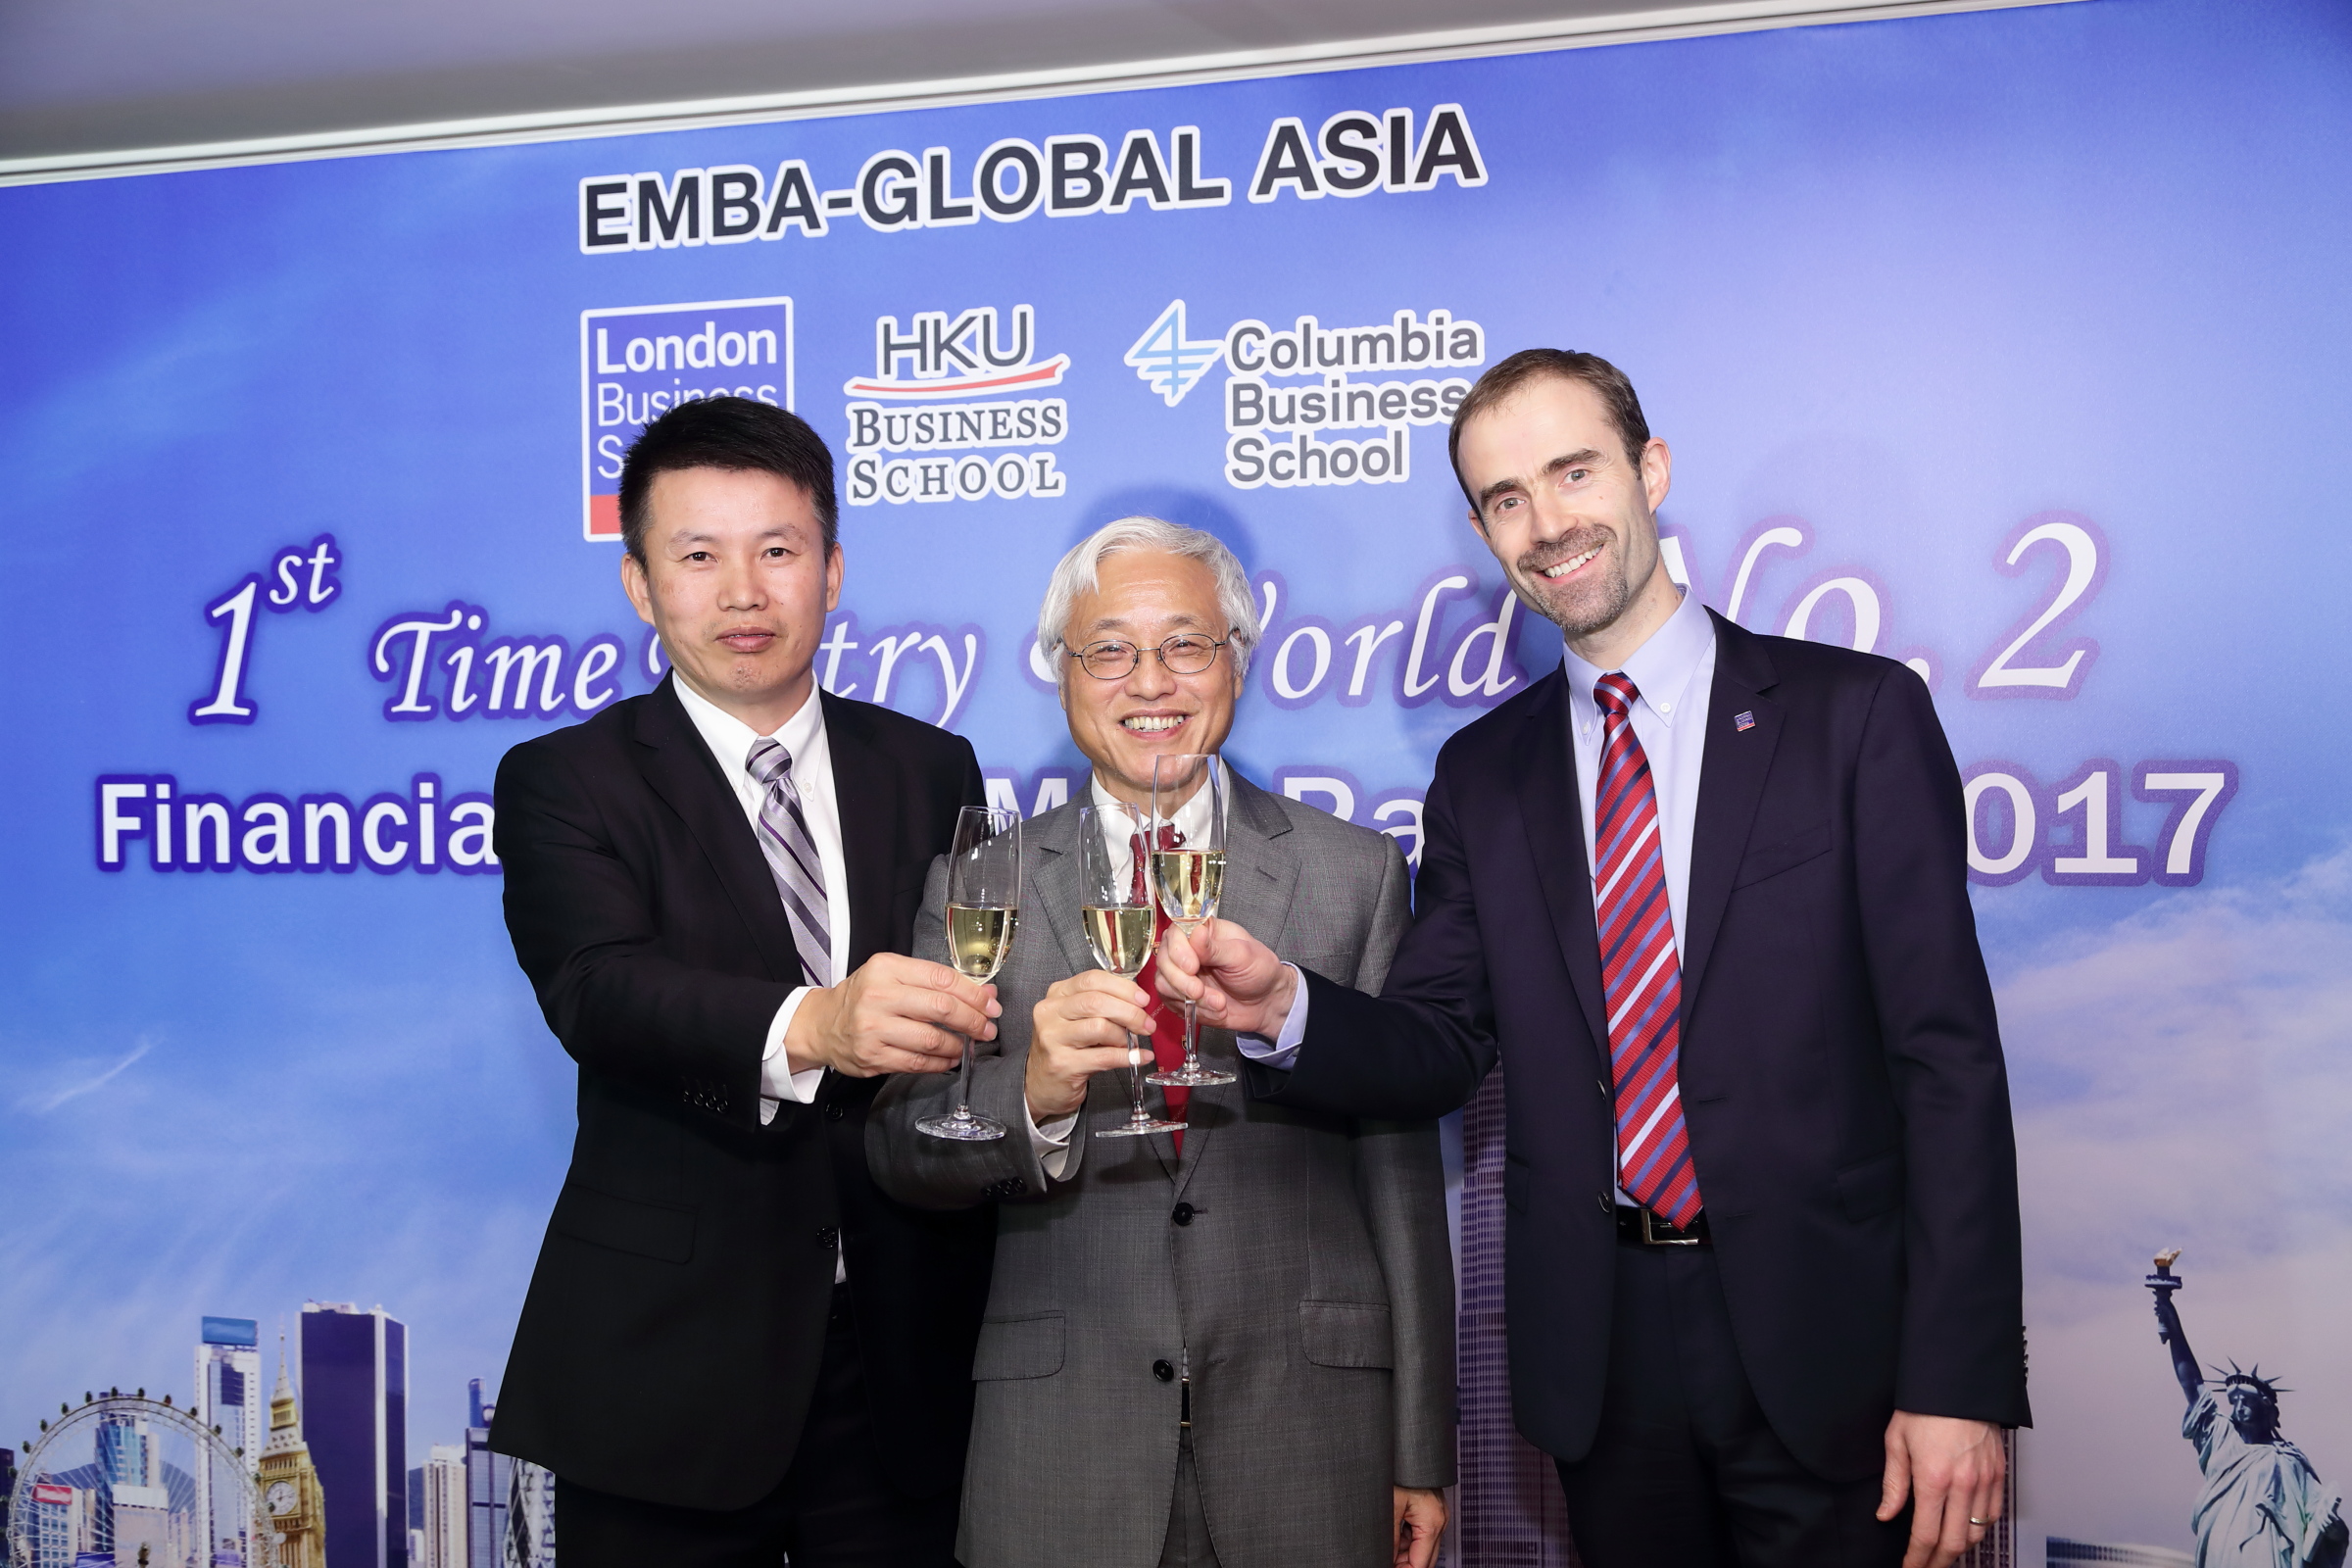 EMBA-Global Asia programme awarded second in the World in its first ever ranking by Financial Times